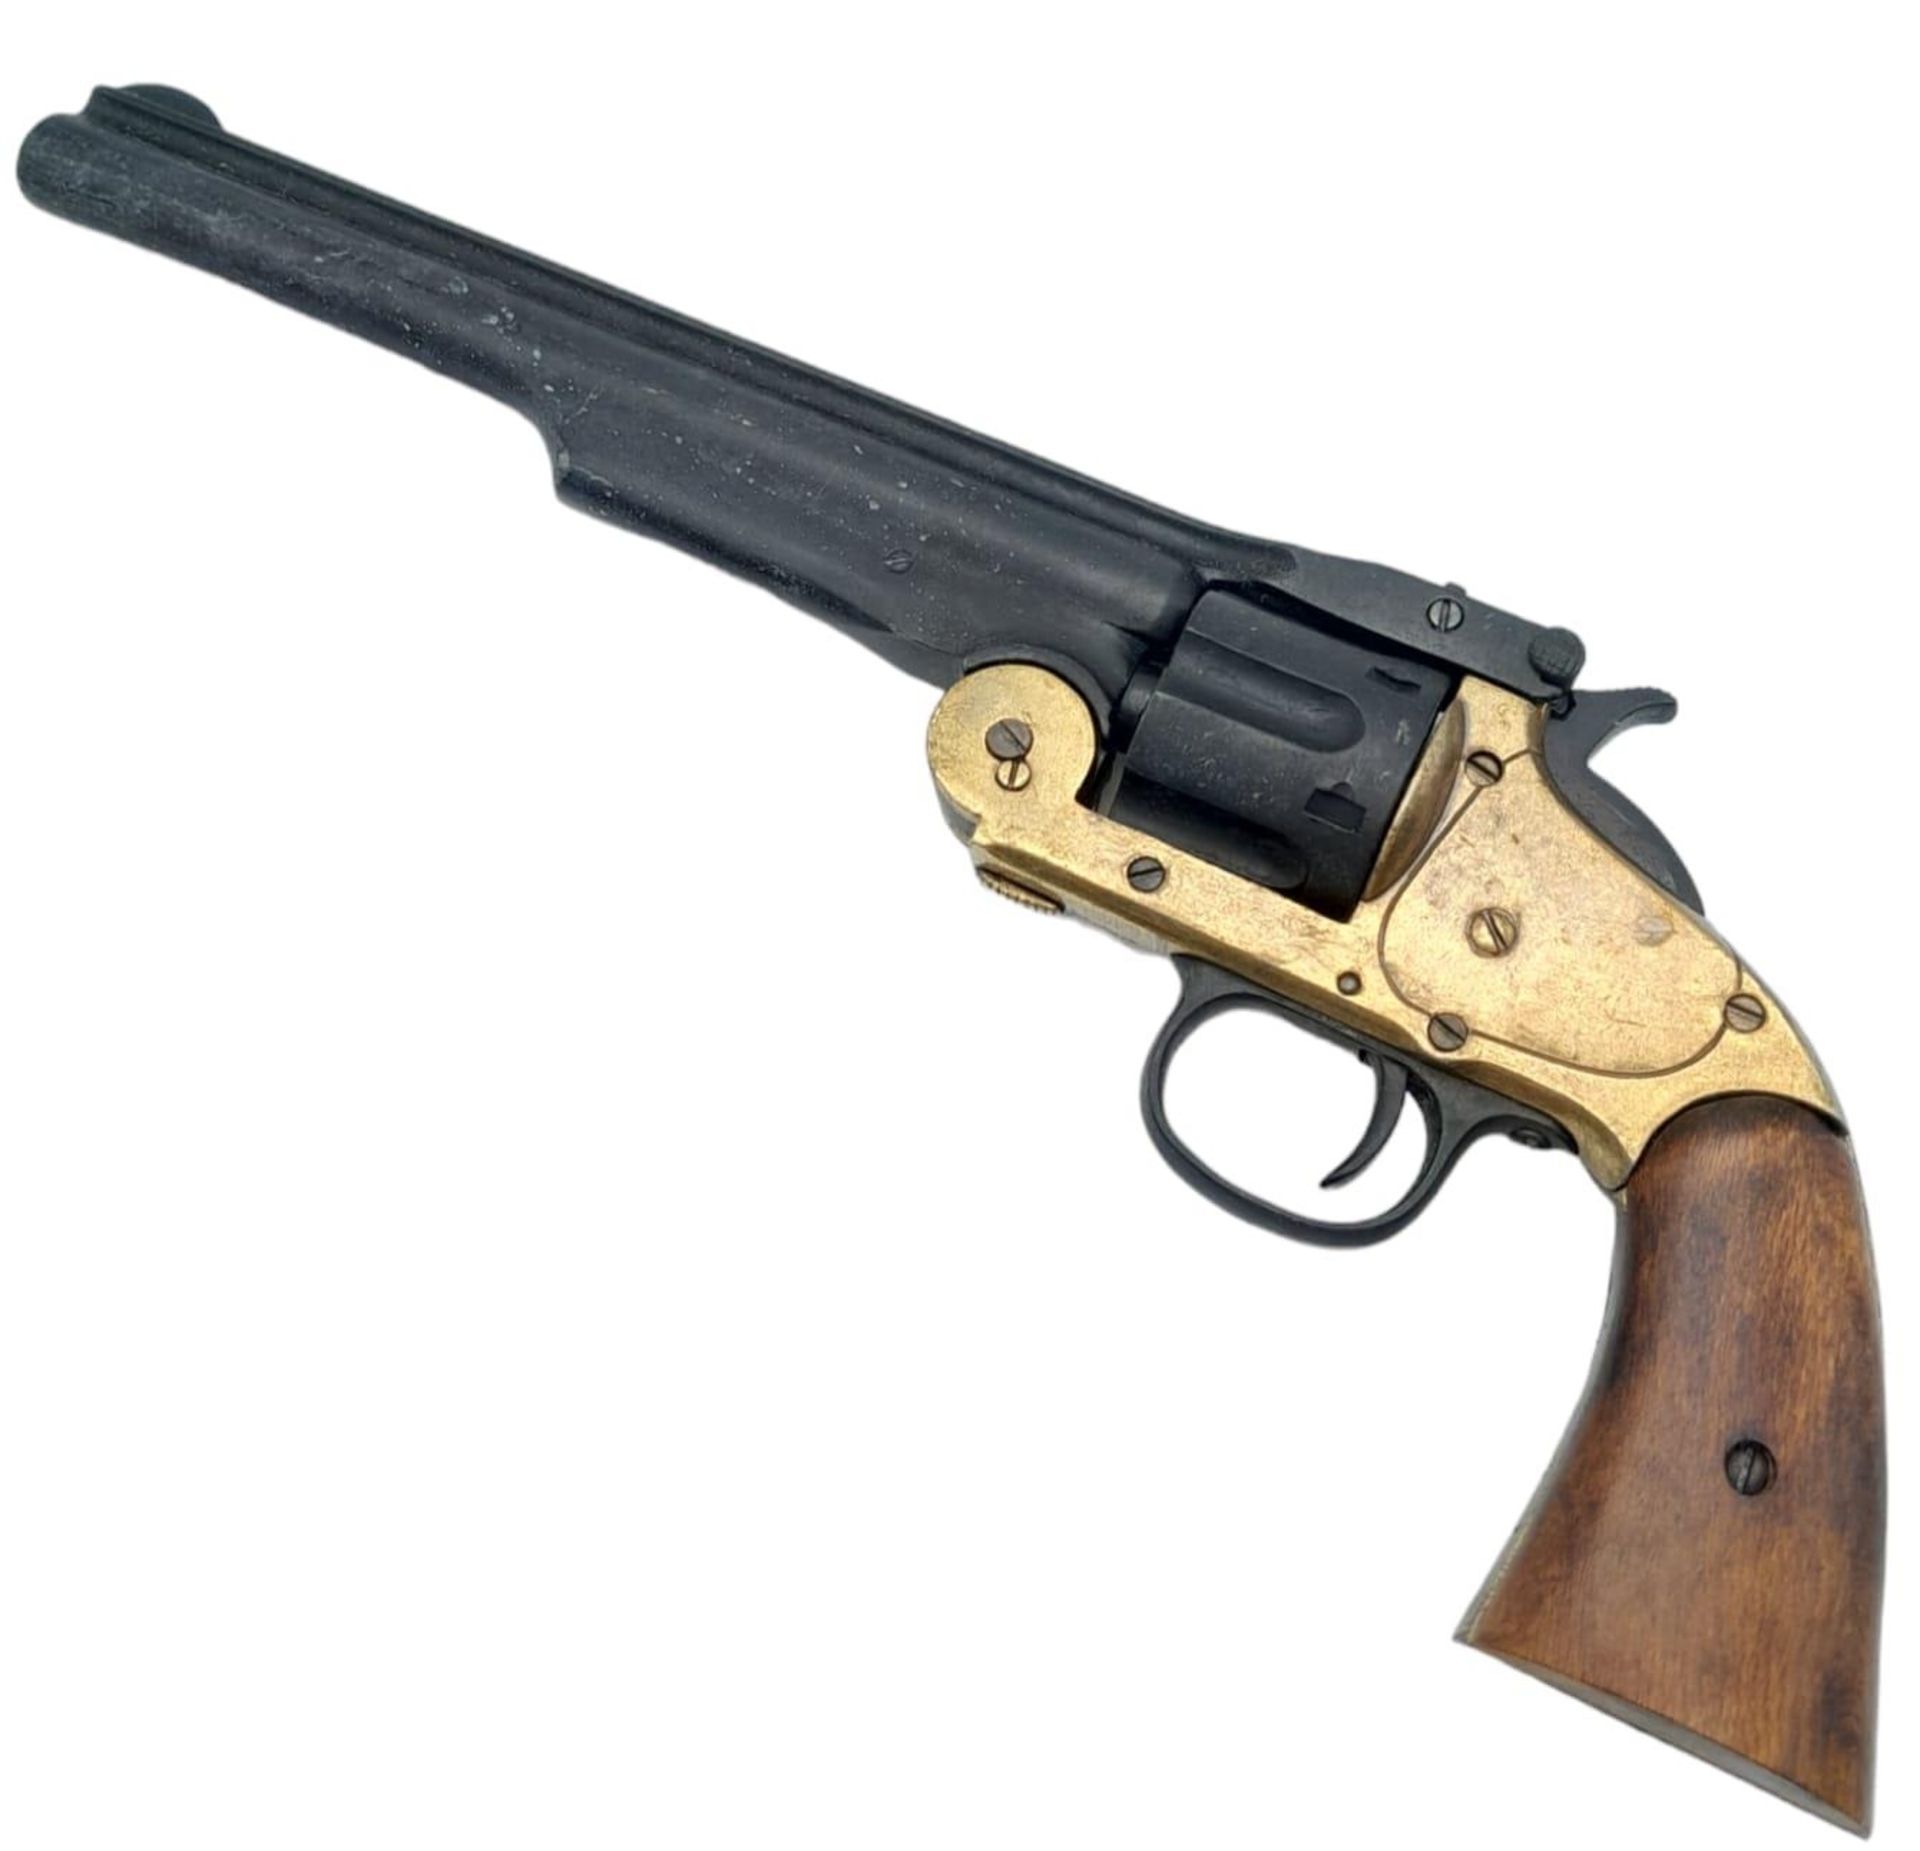 A FULL SIZE METAL REPLICA NAVY COLT SIX CHAMBER PISTOL WITH DRY FIRING ACTION AND REVOLVING BARREL